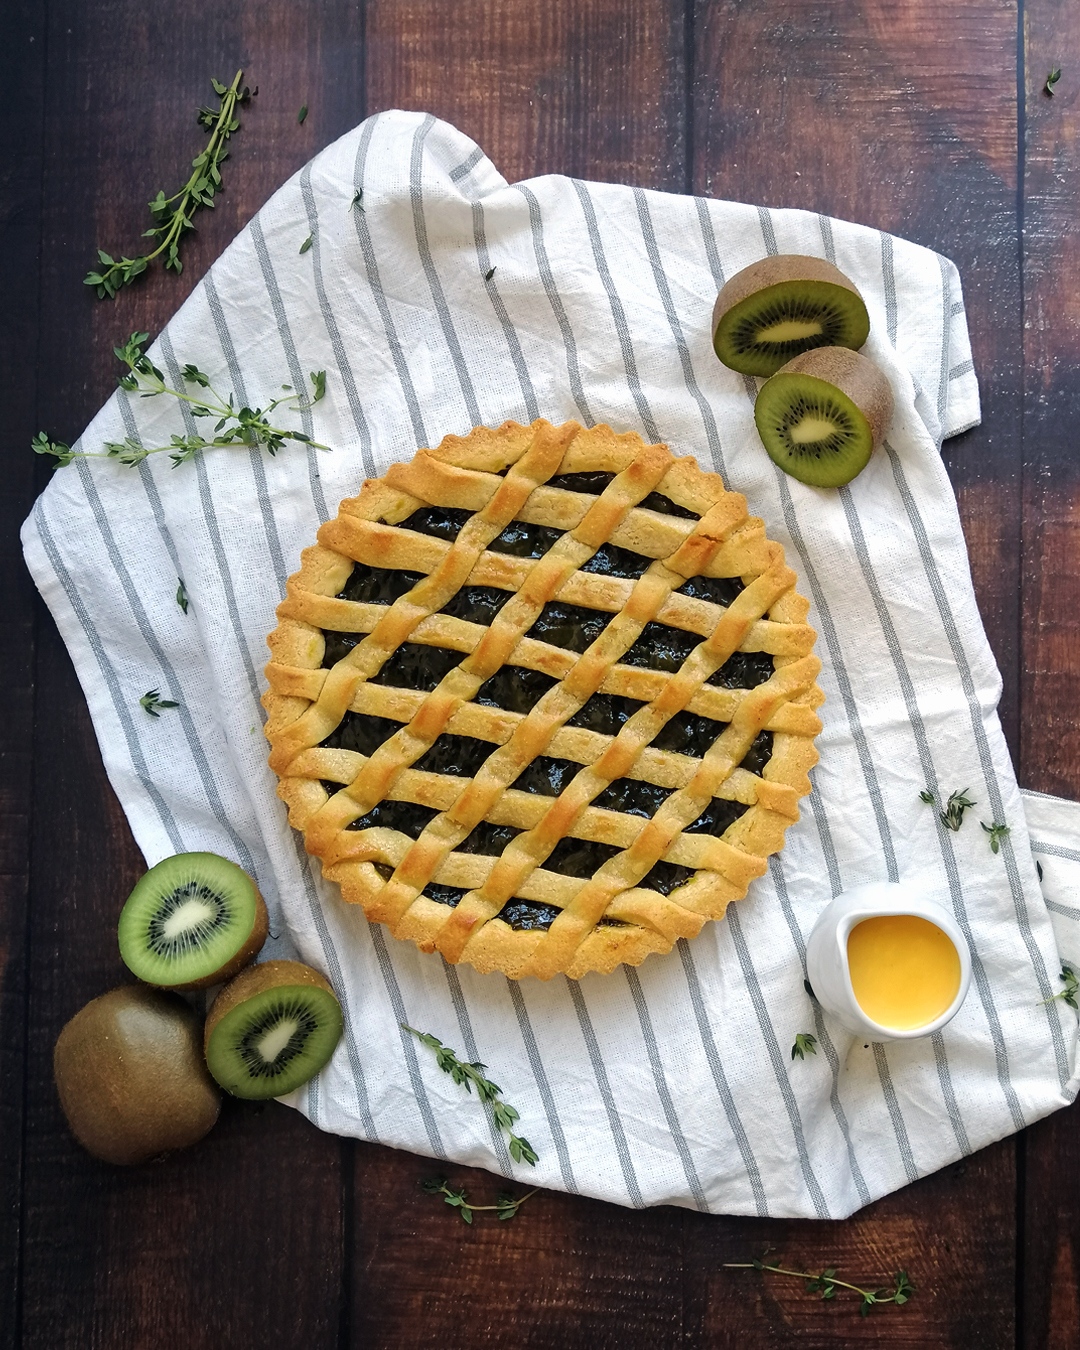 Kiwi compote baked tart with criss cross pastry top, laying on a striped tea towel. Fresh kiwis and jug of custard laying around